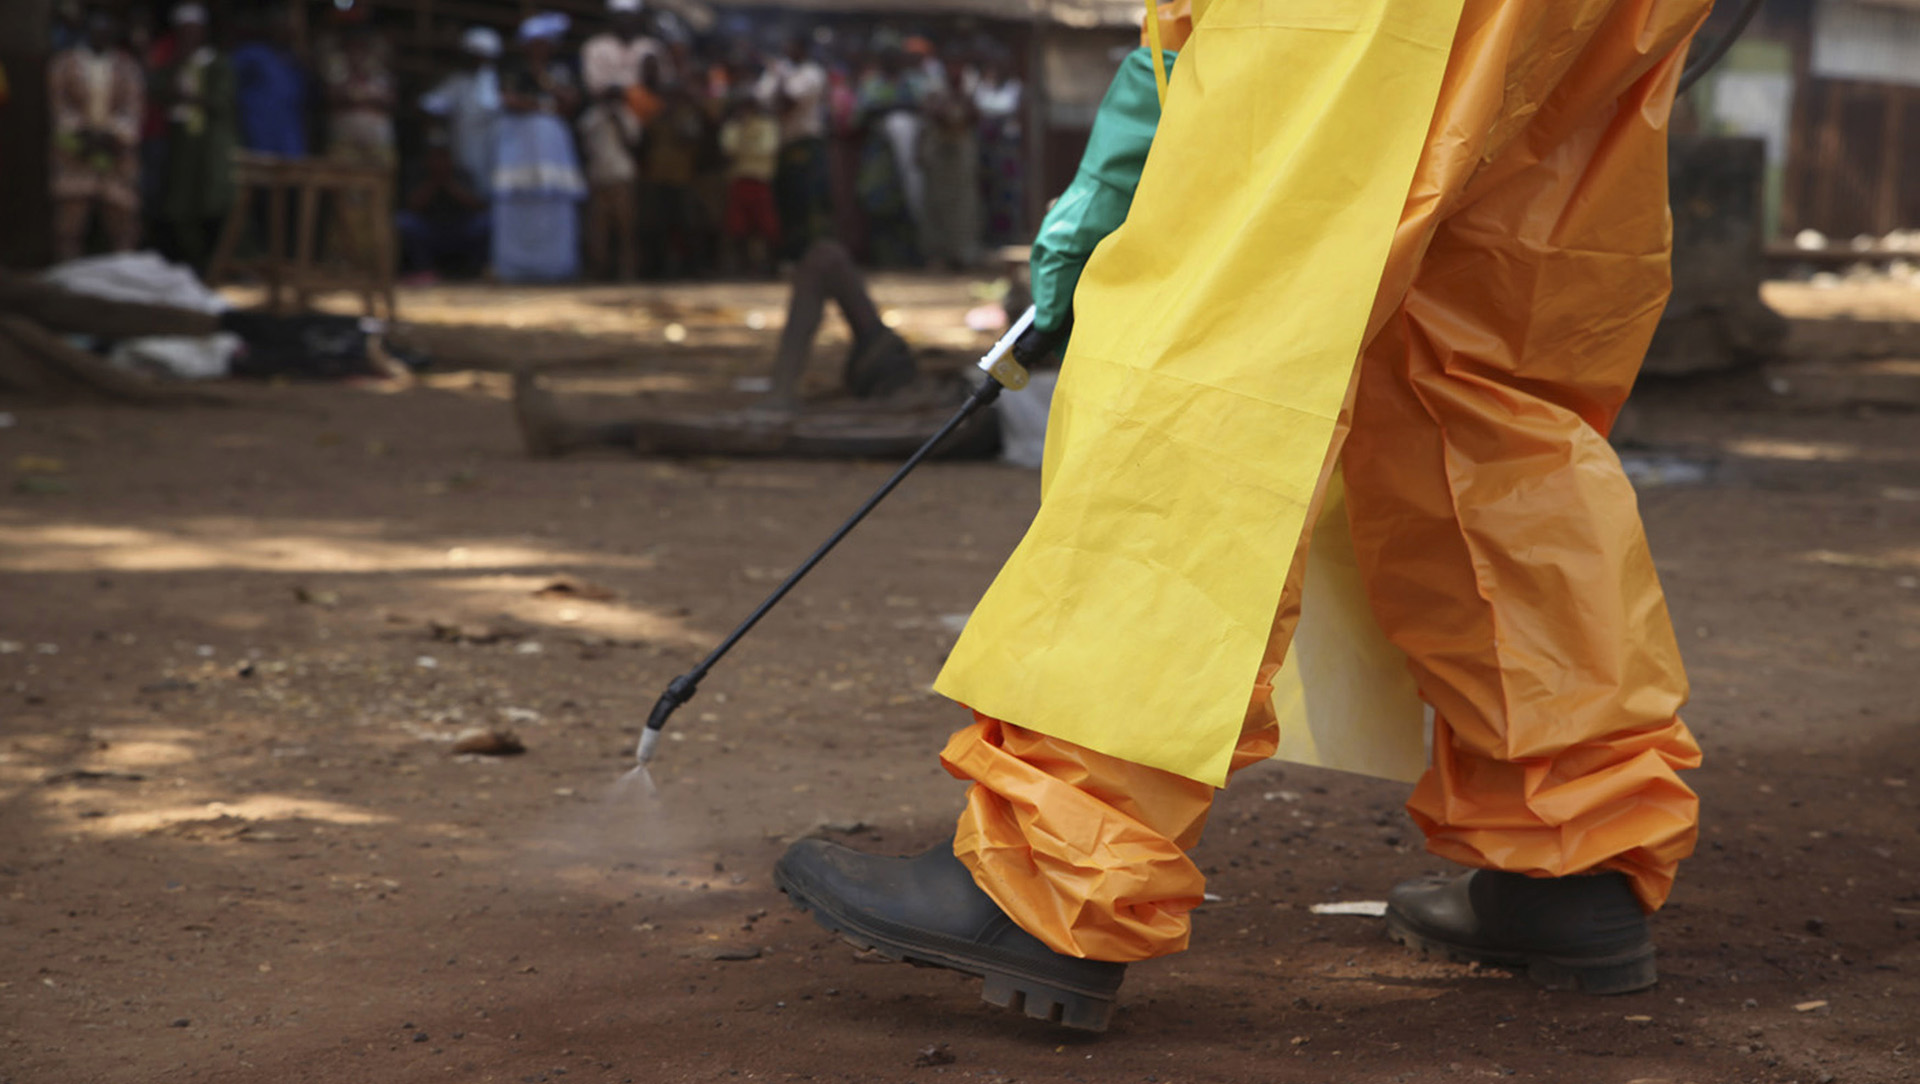 The image shows the bottom half of a person's body - dressed in a hazmat suit, apron, gloves, and boots - holding a disinfectant wand spraying the ground. 